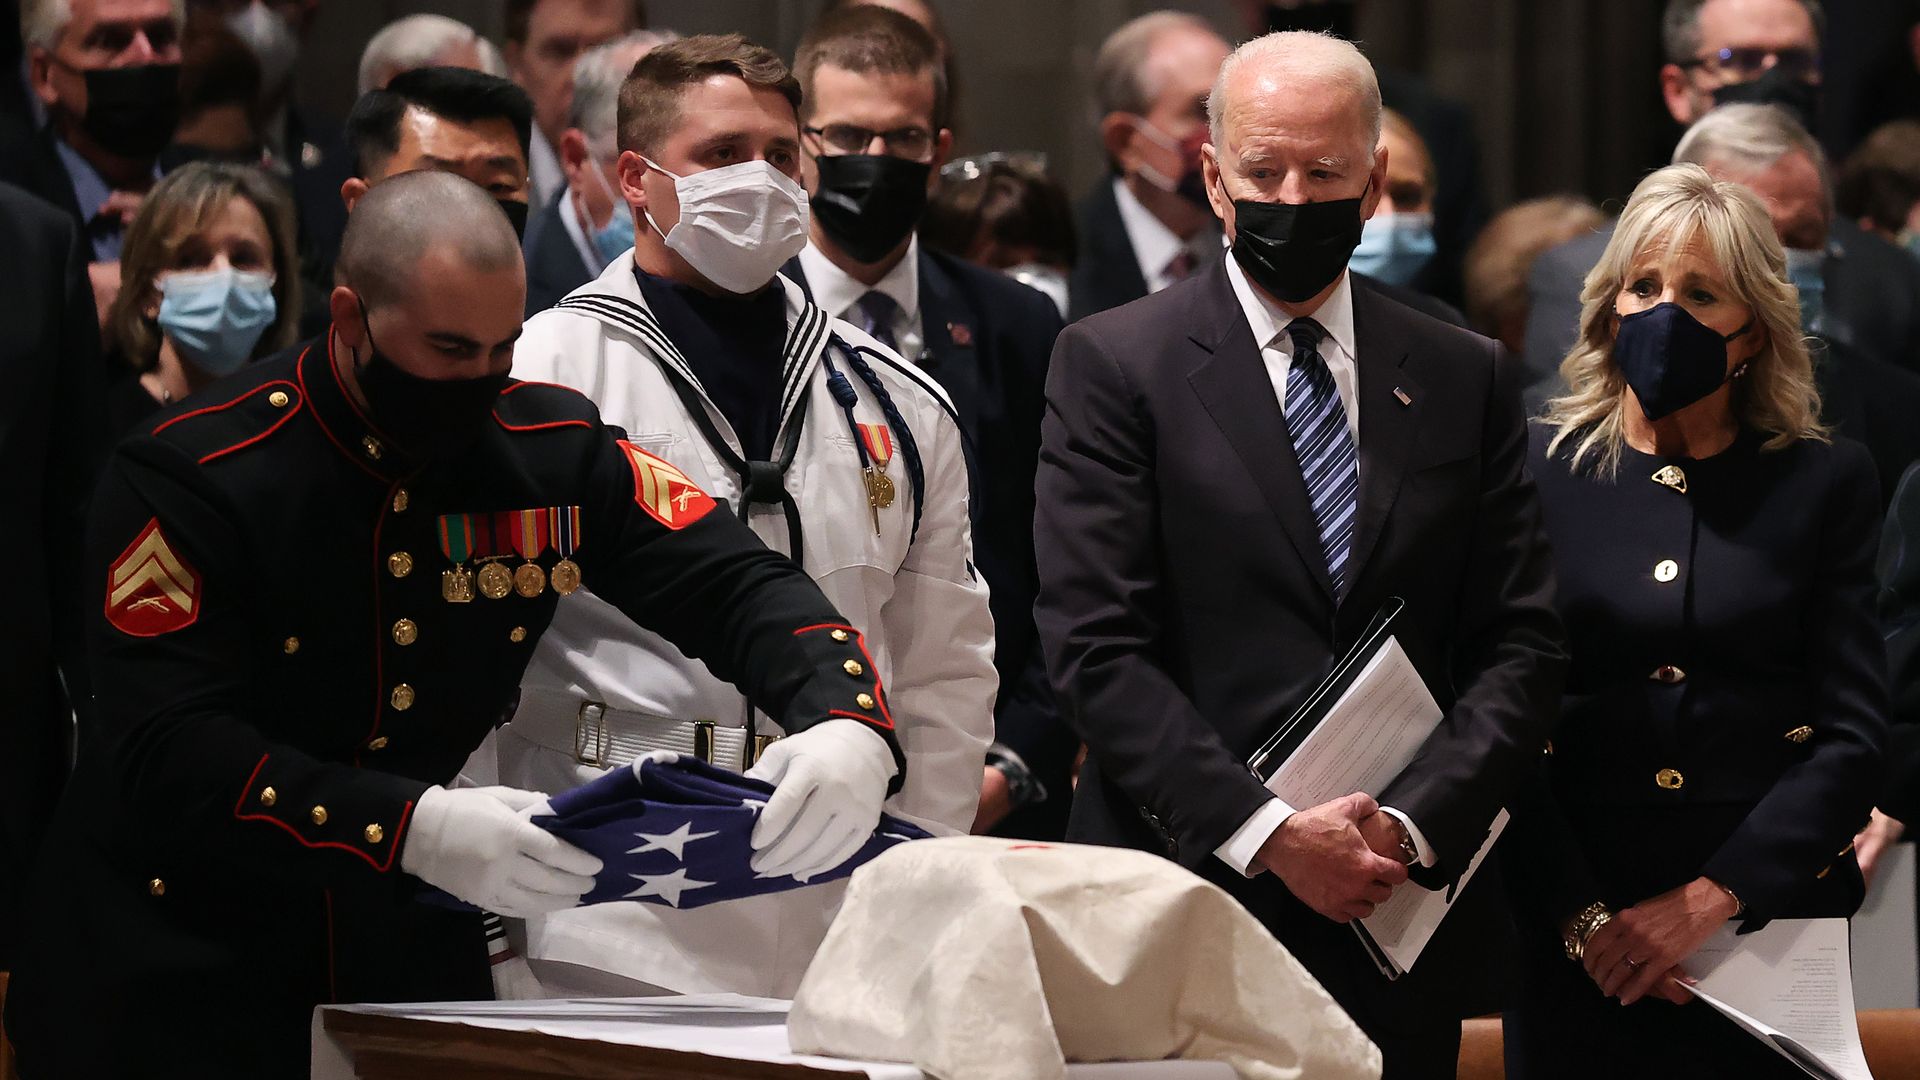 President Biden is seen watching as a Marine places a flag next to the urn bearing the ashes of the late Sen. John Warner.